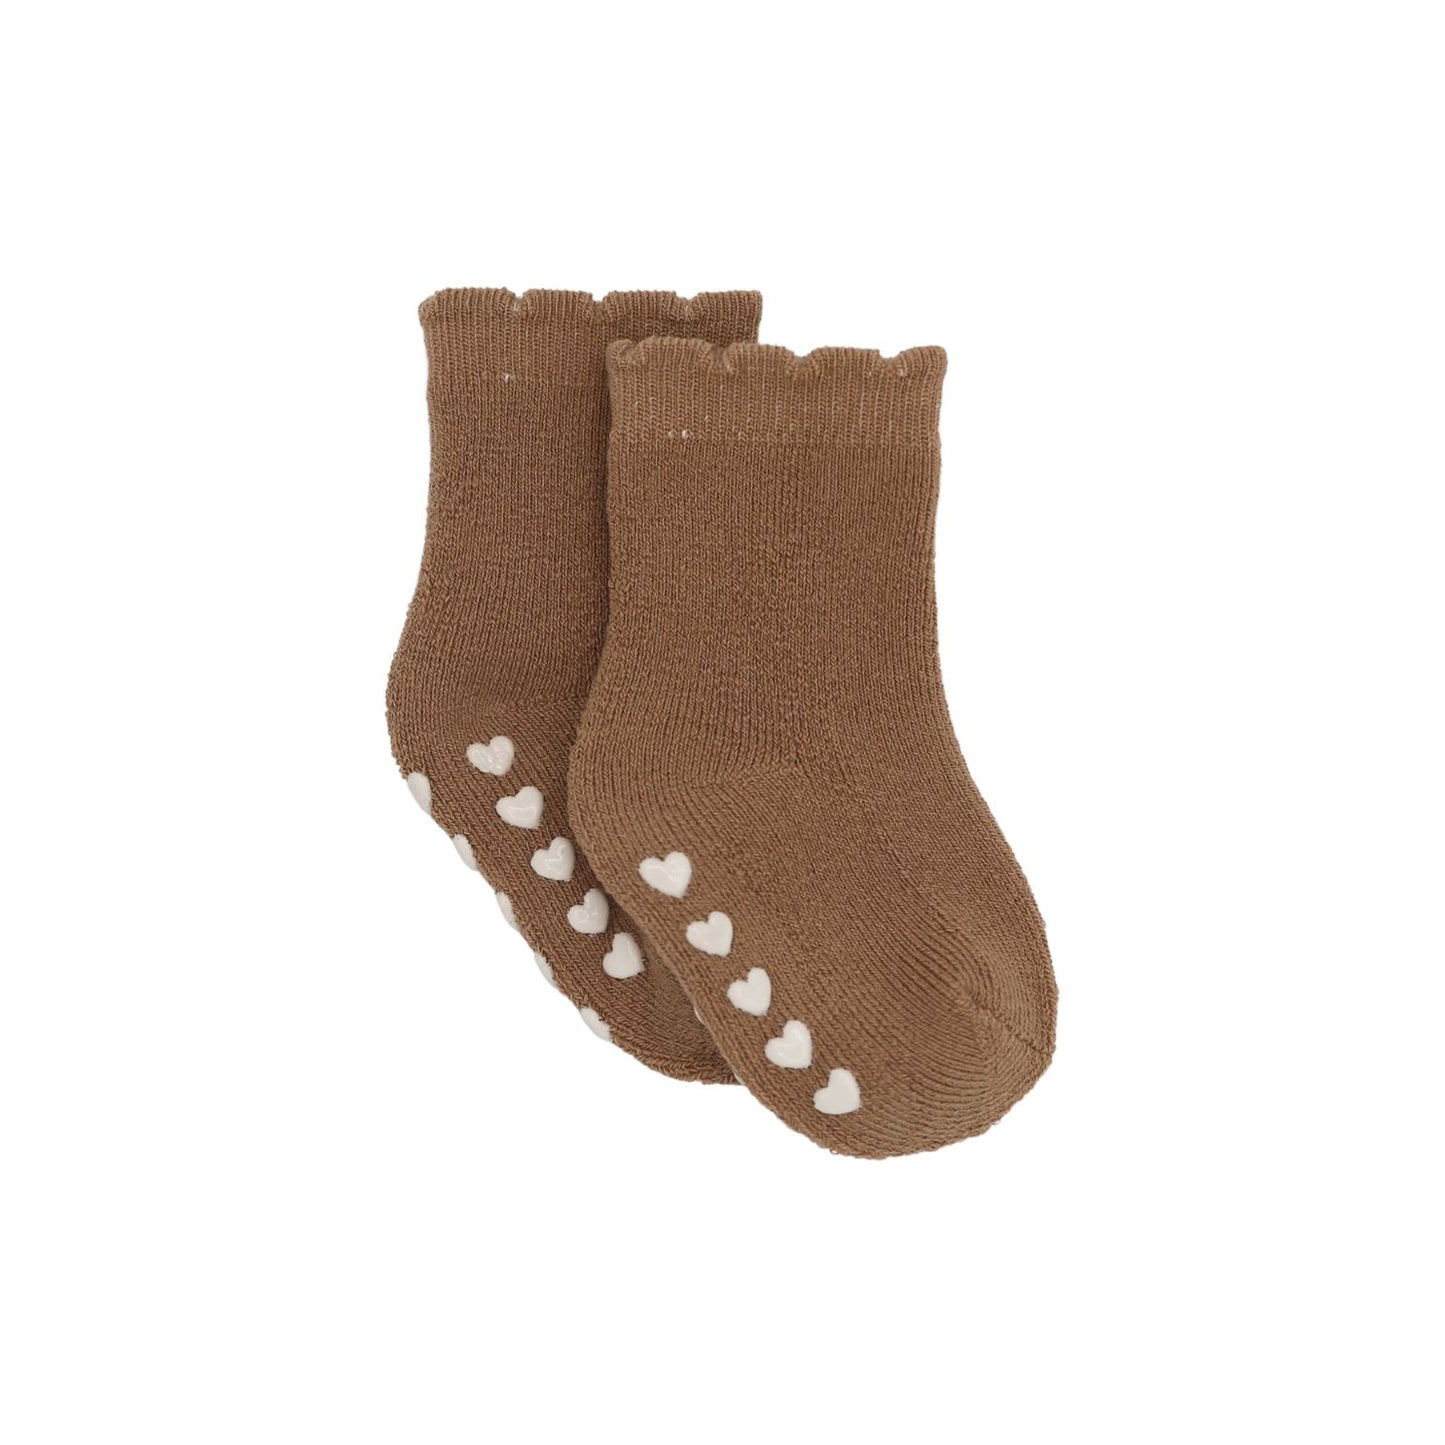 The Baby Cubby Scalloped Heart Grip Socks - Brown